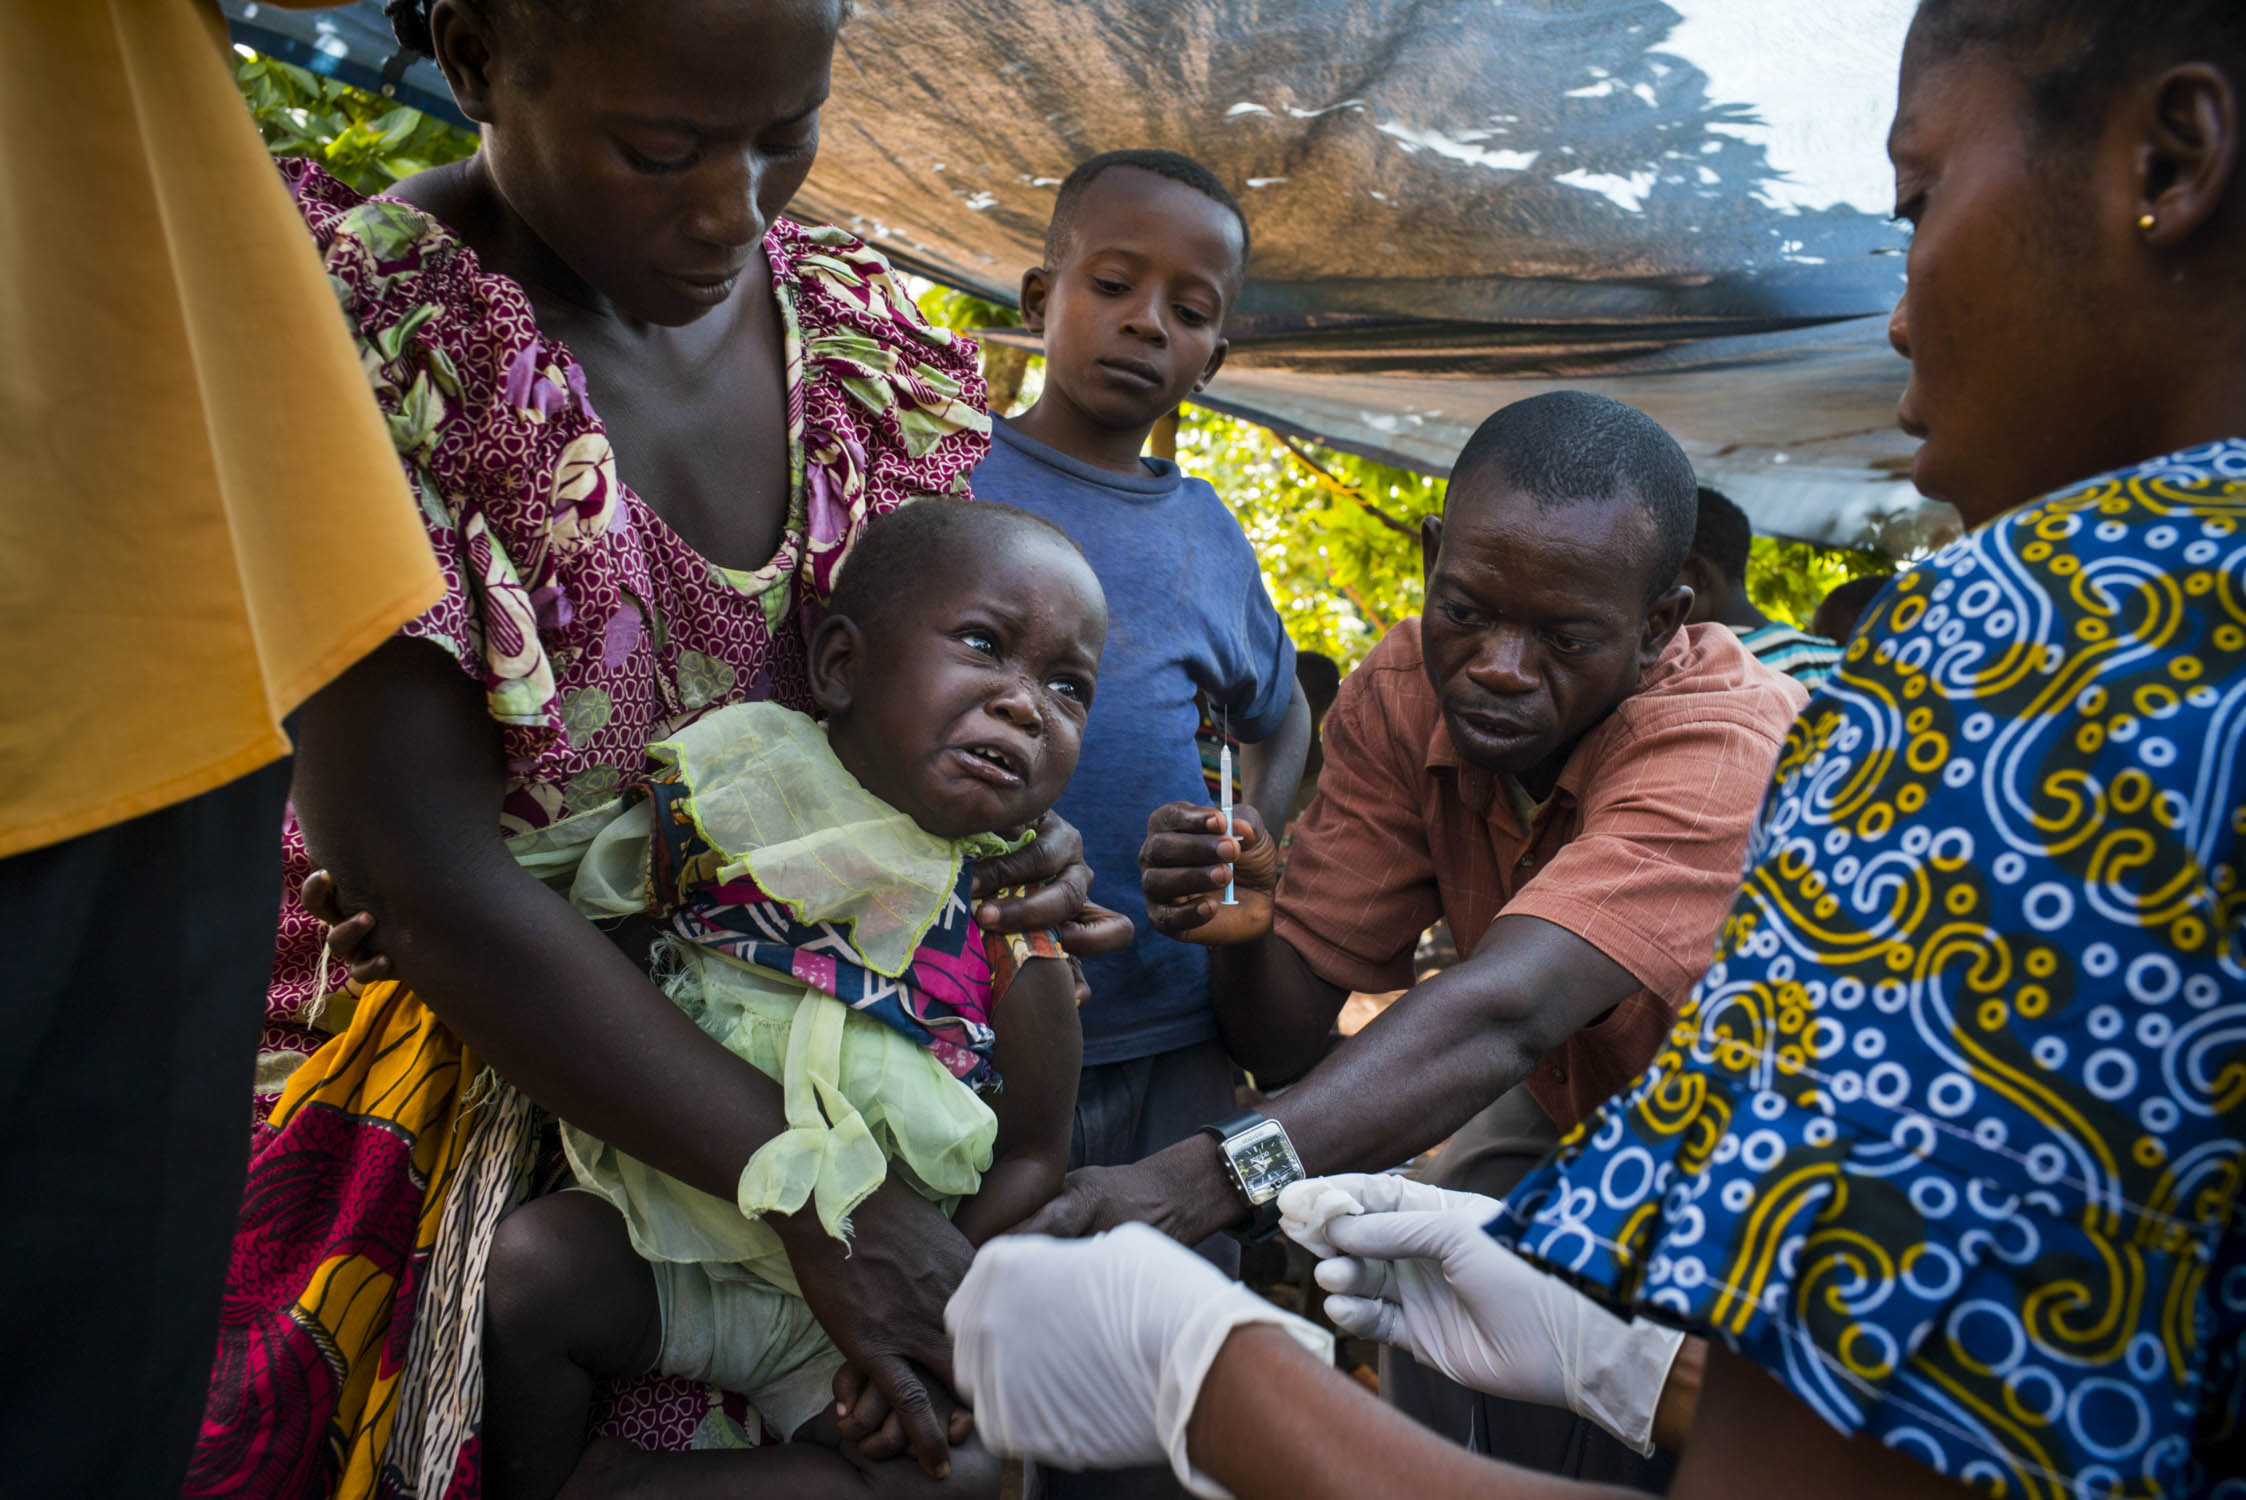  A child is vaccinated during a five-day measles vaccination campaign run by MSF in a remote region of northern Democratic Republic of the Congo (DRC). MSF named measles among the top five epidemics that could erupt or worsen in 2016.&nbsp;DRC has th